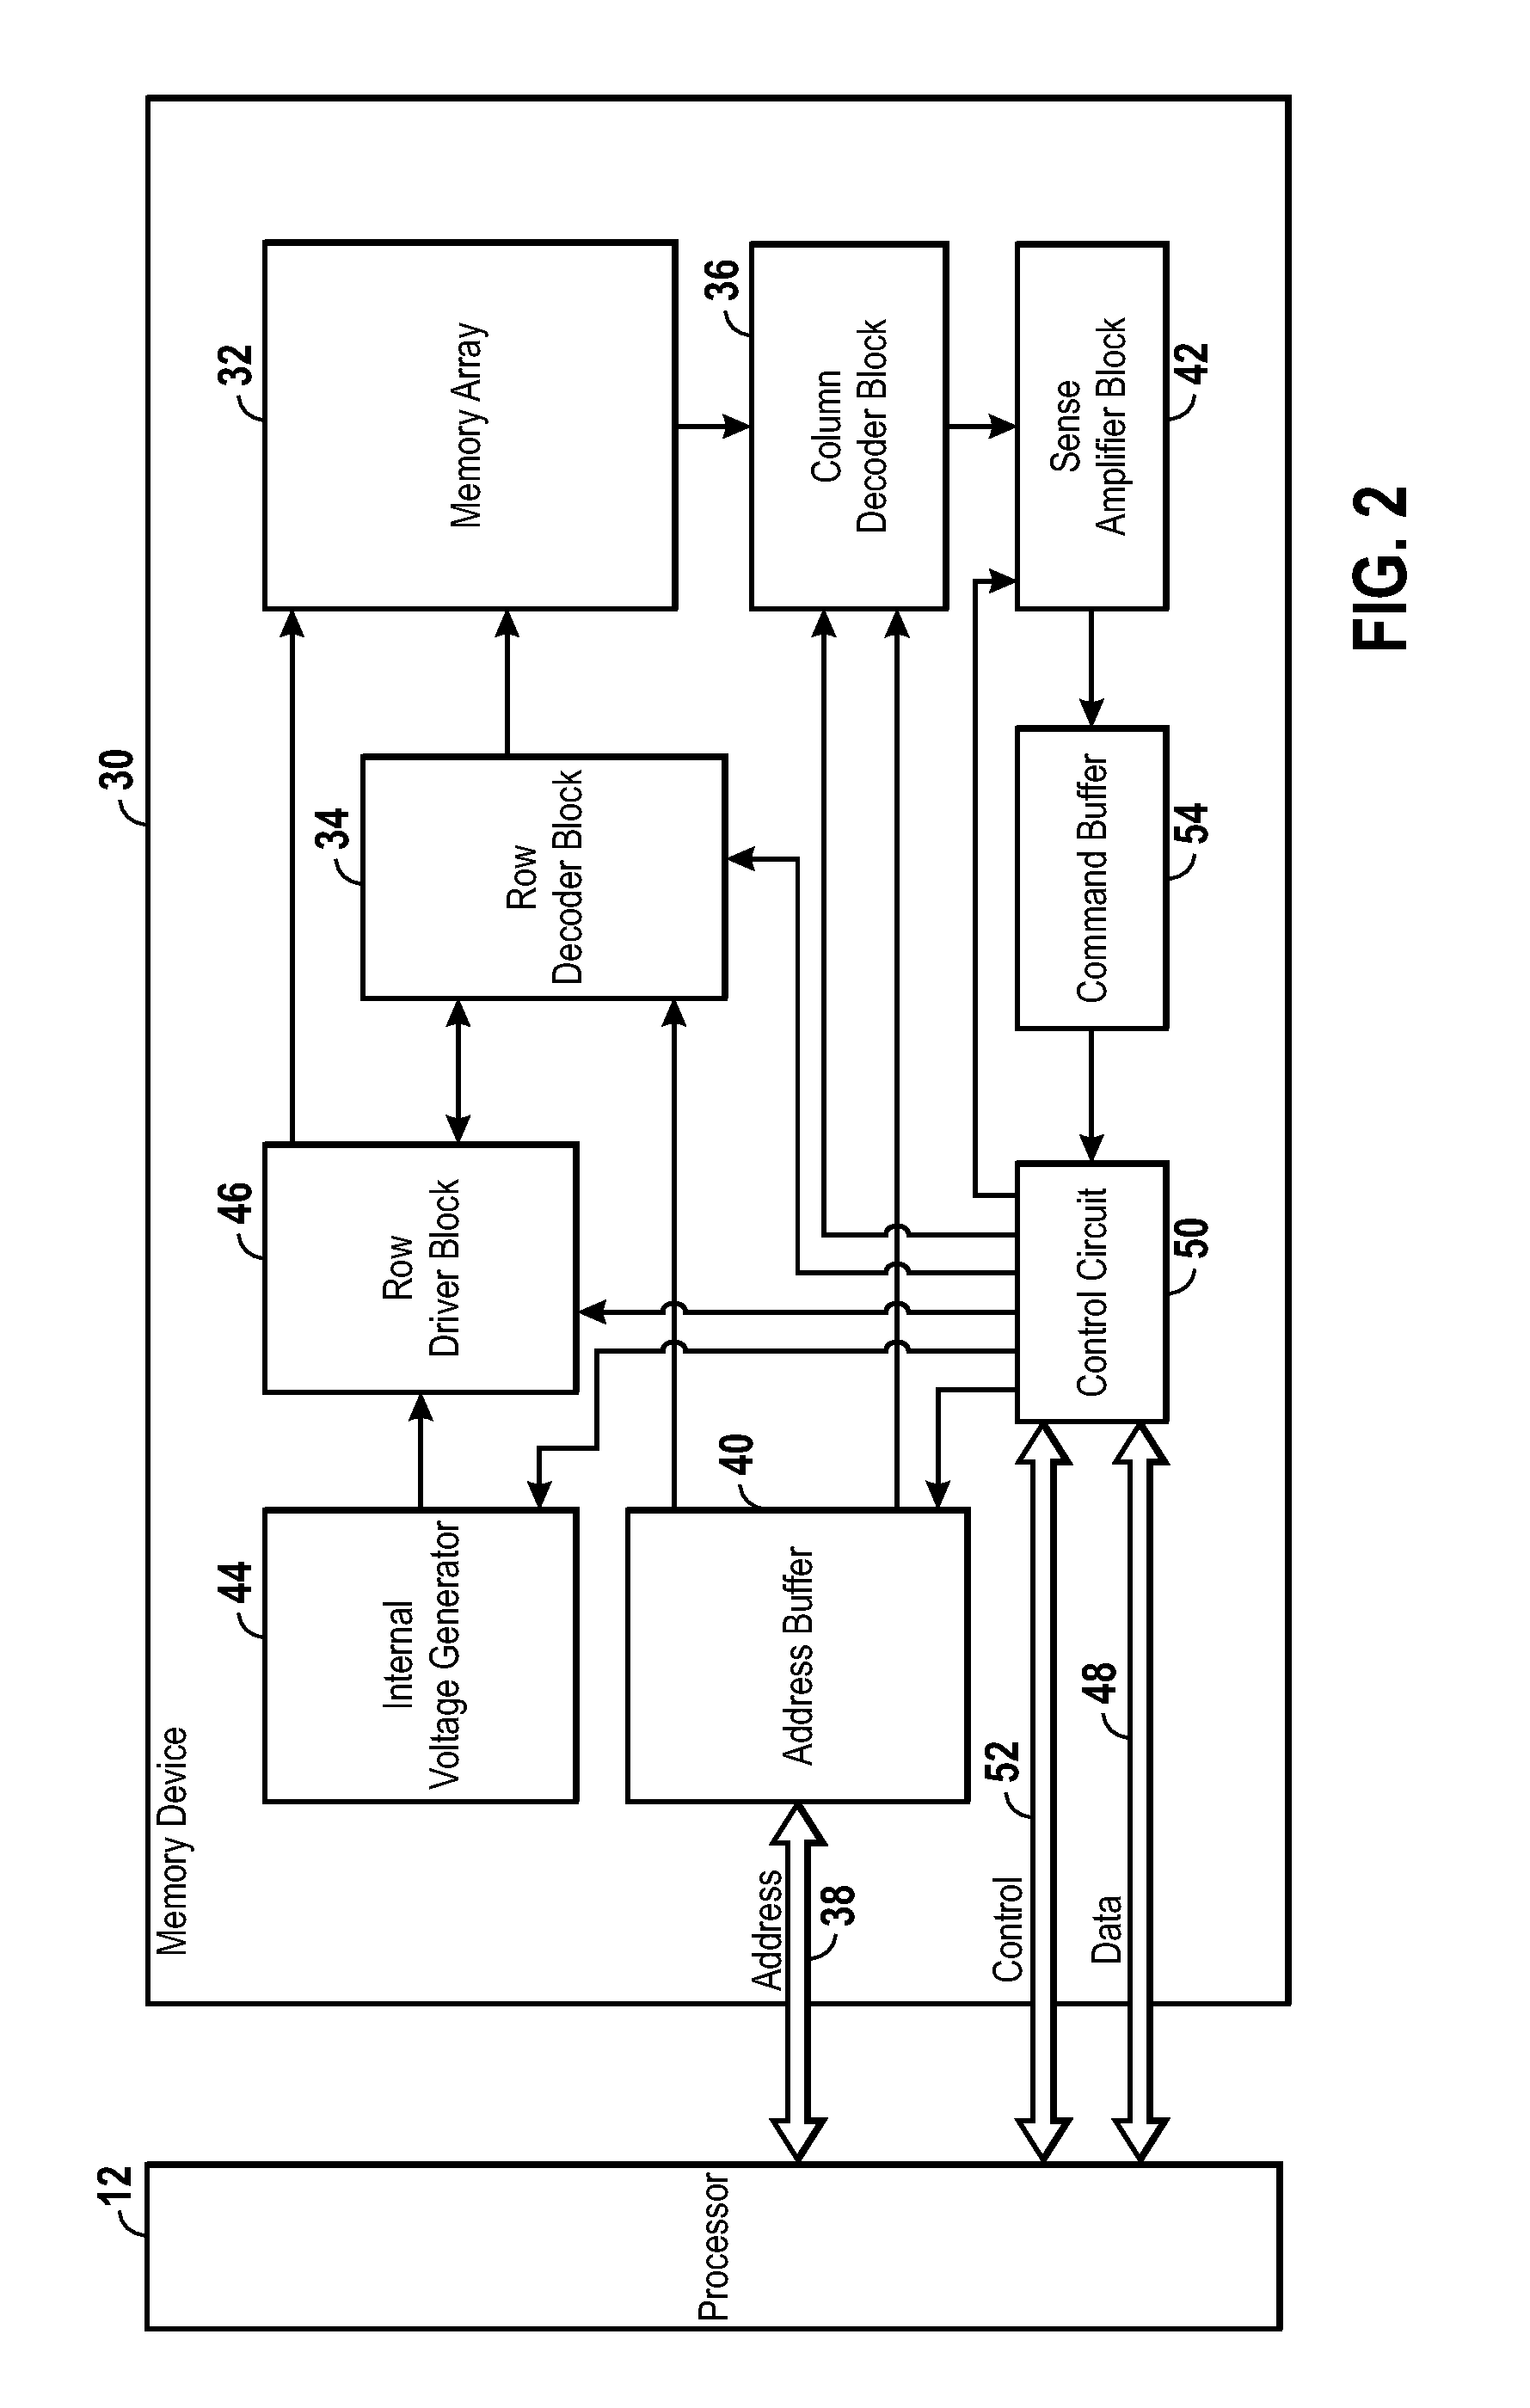 Biasing system and method